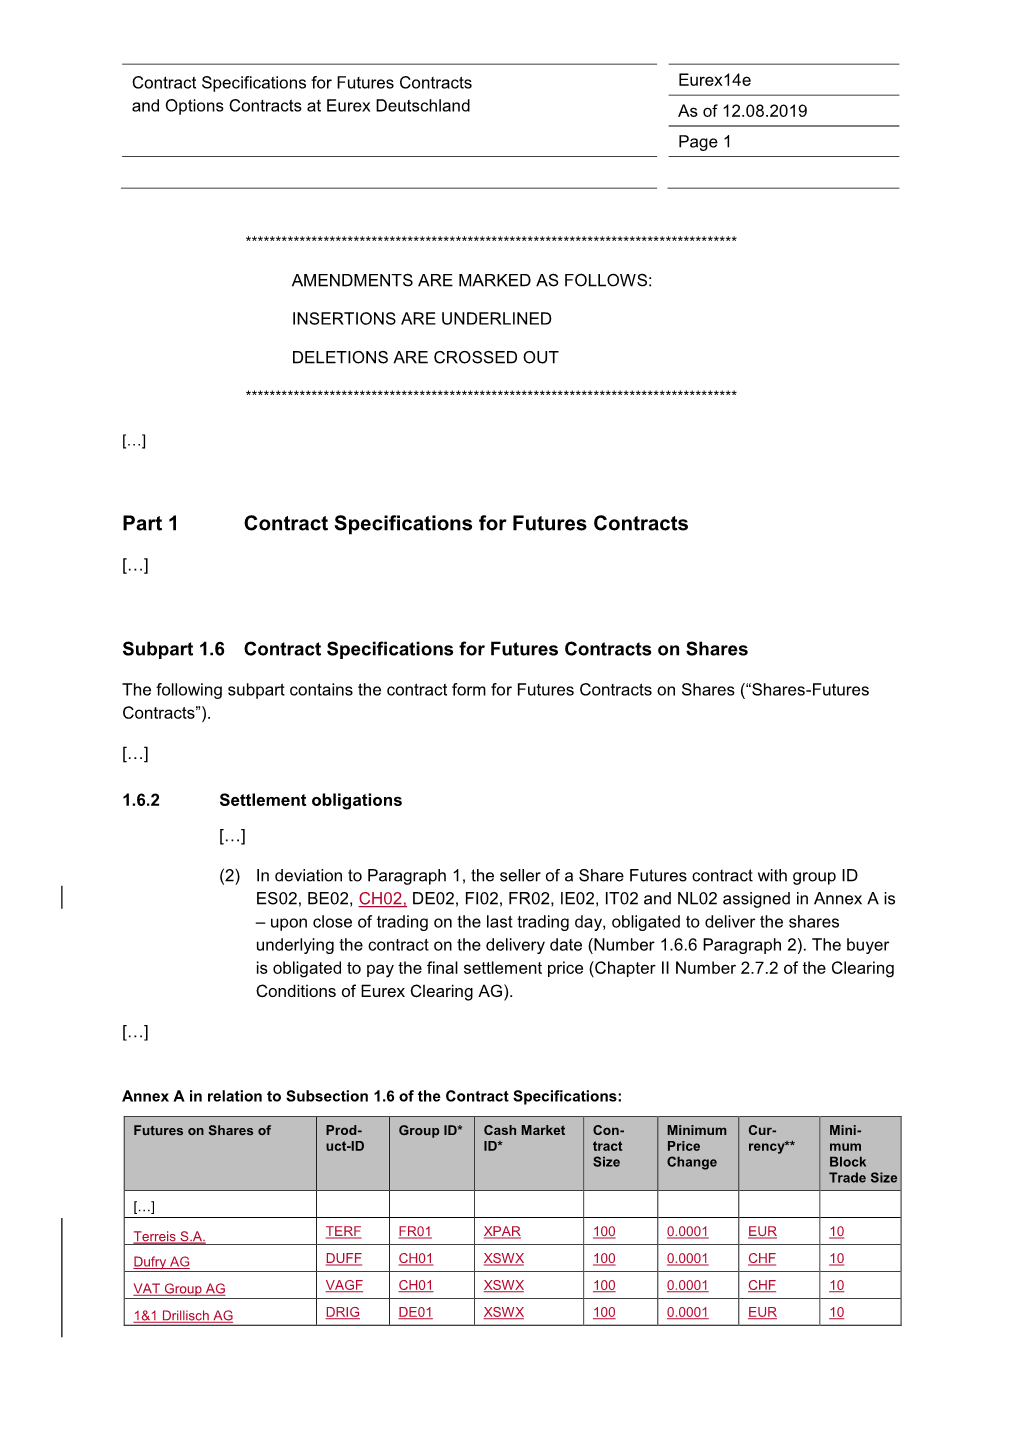 Part 1 Contract Specifications for Futures Contracts